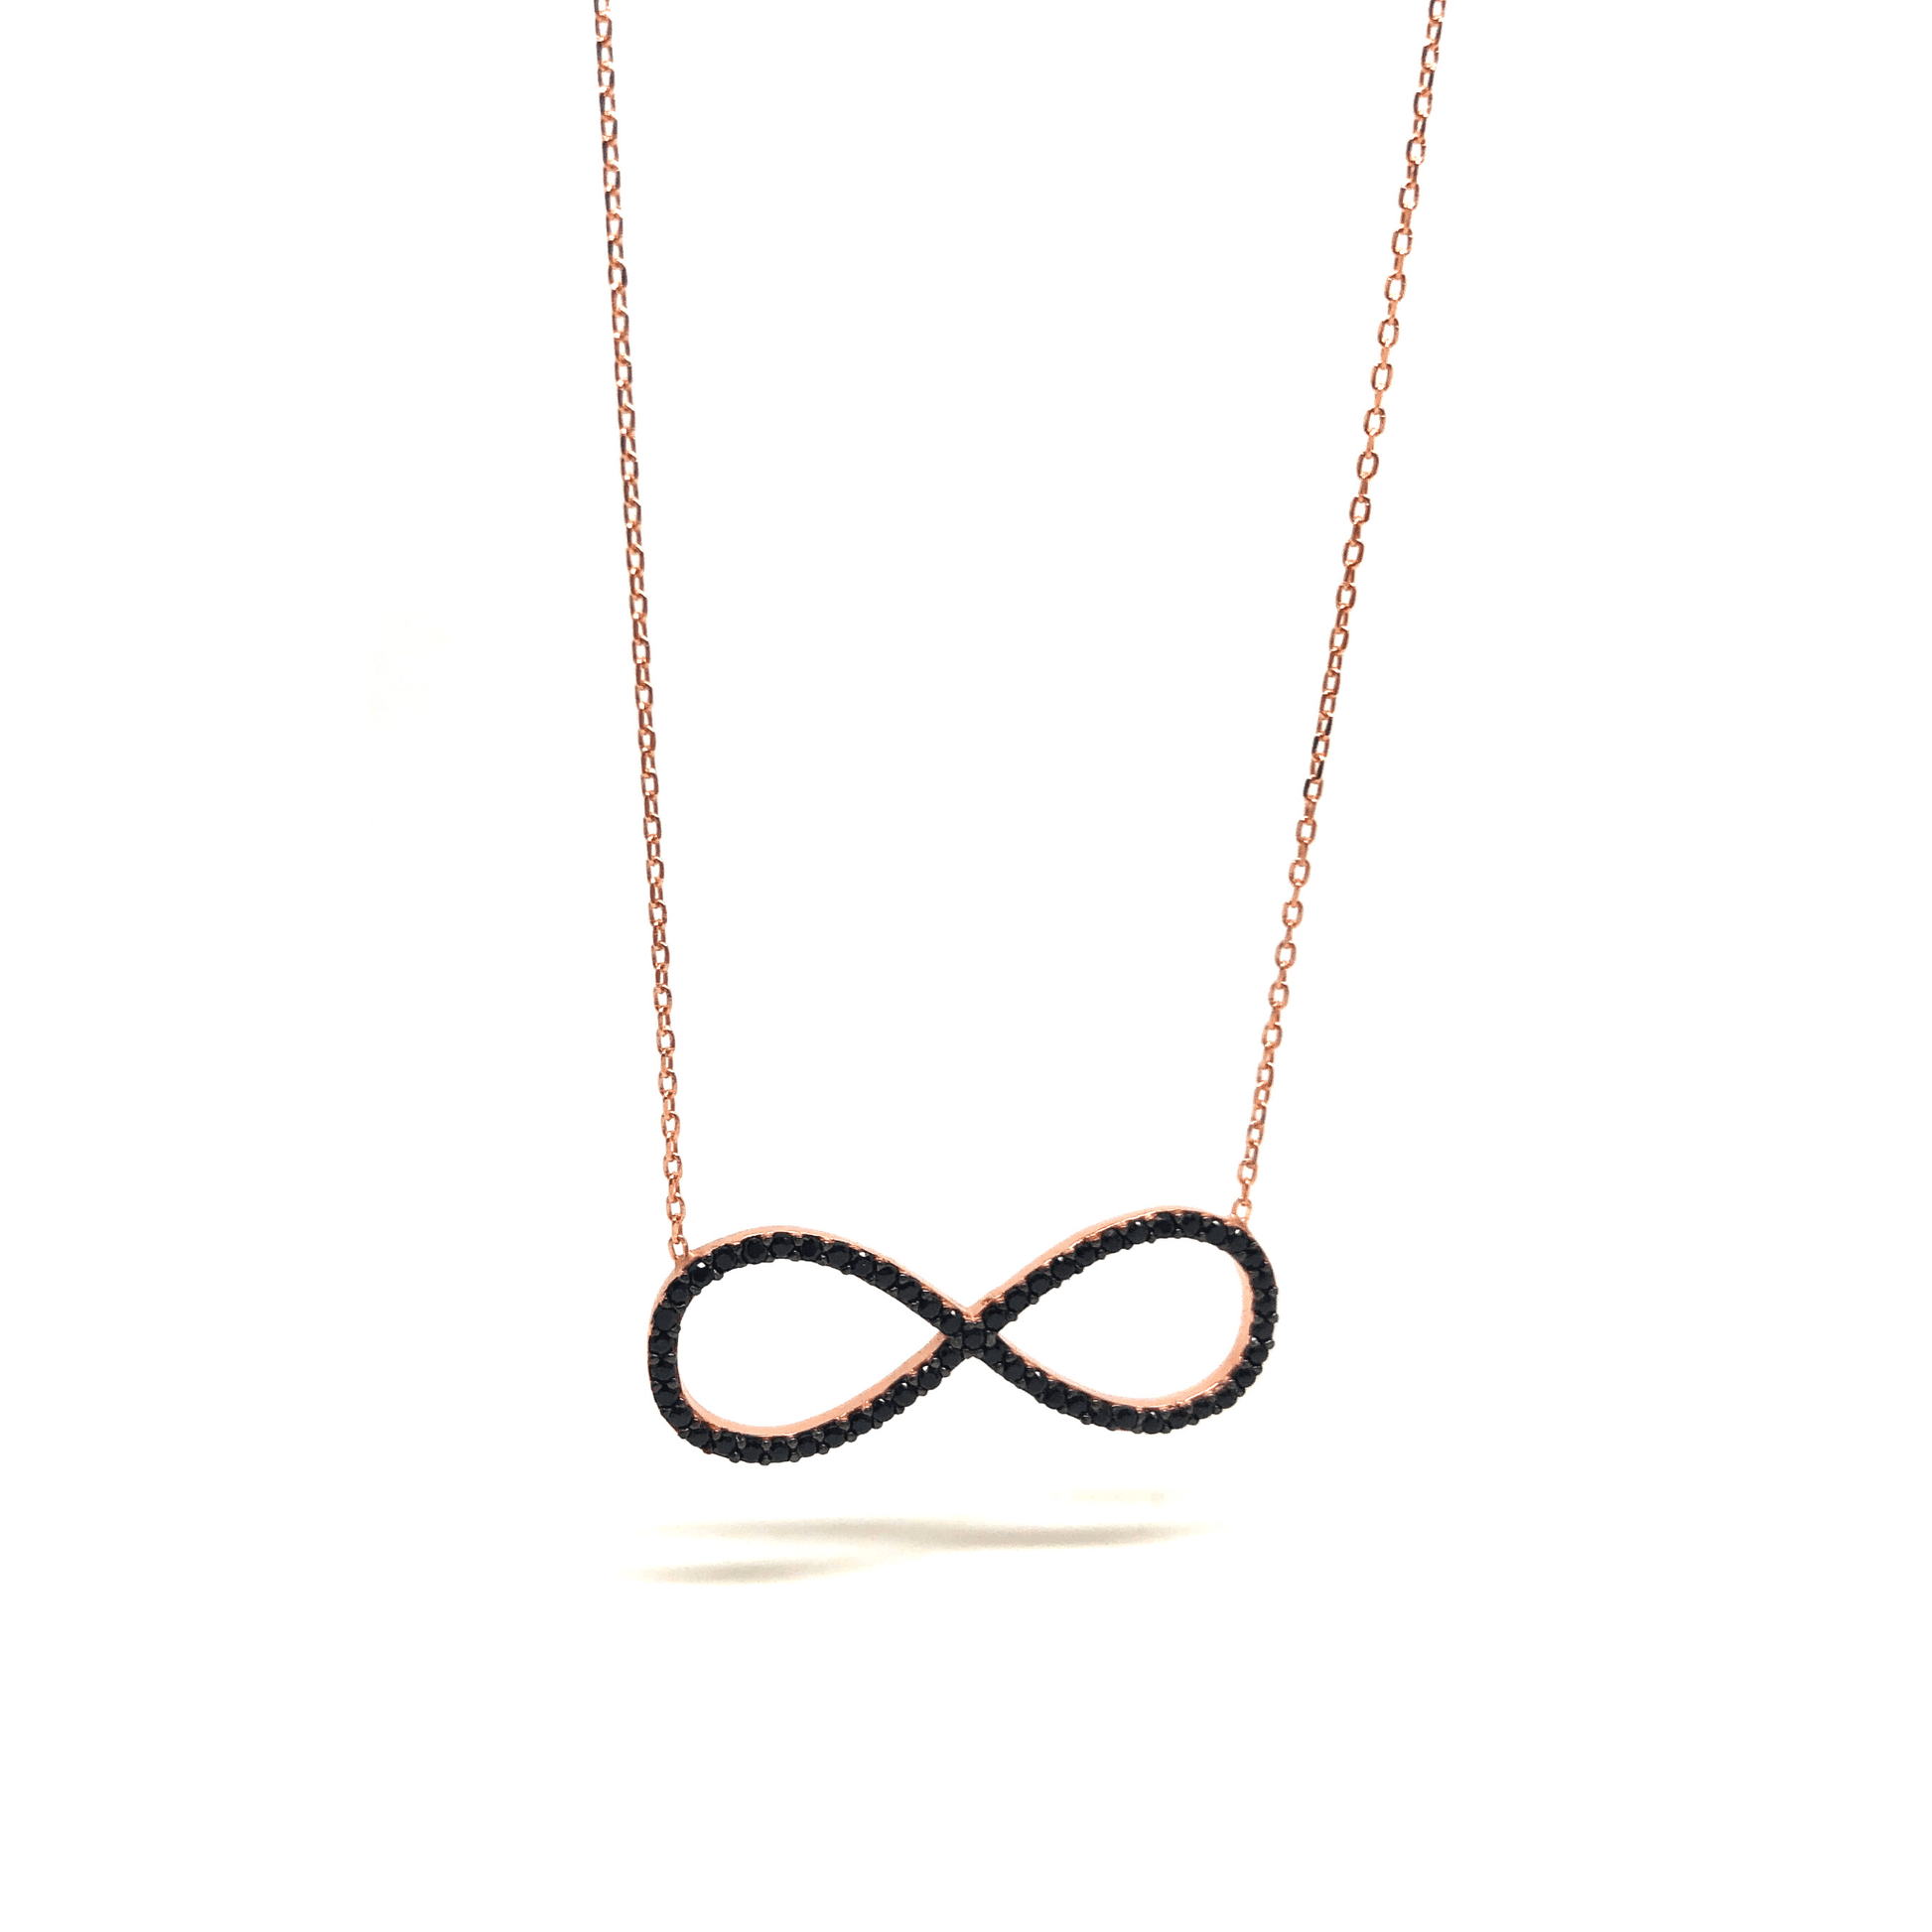 Italian Sterling Silver Infinity Necklace in Rose Gold and Black Stones - Naked Nation UK